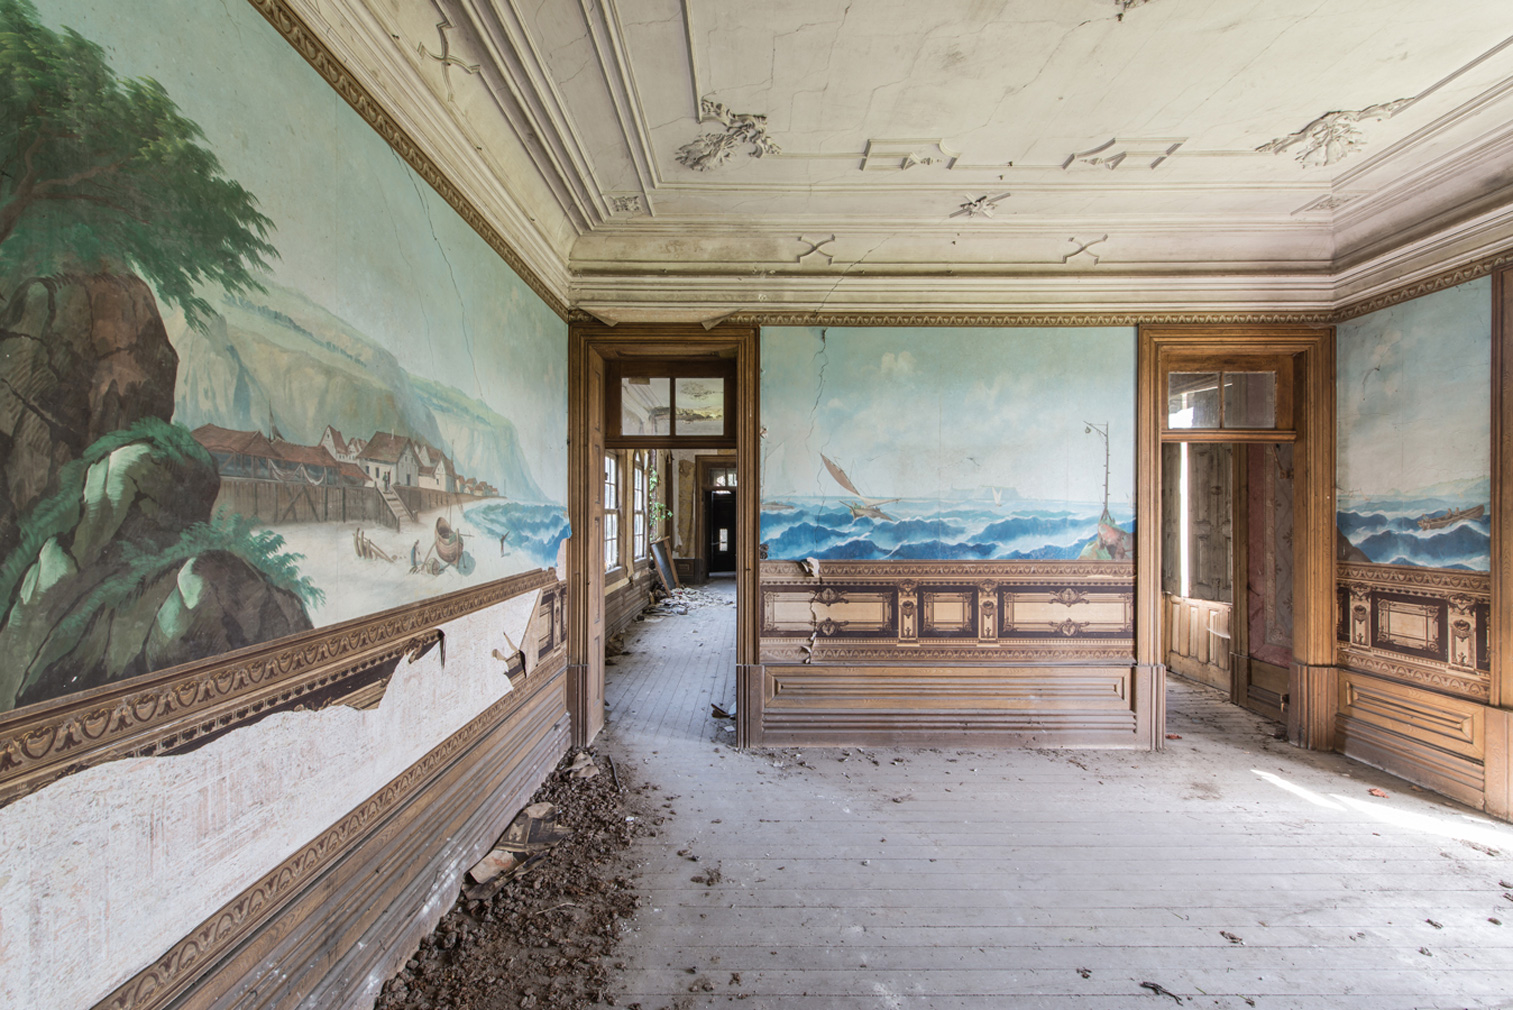 Europe’s ghostly frescos star in Romain Veillon’s 'Le Musee Imaginaire' series